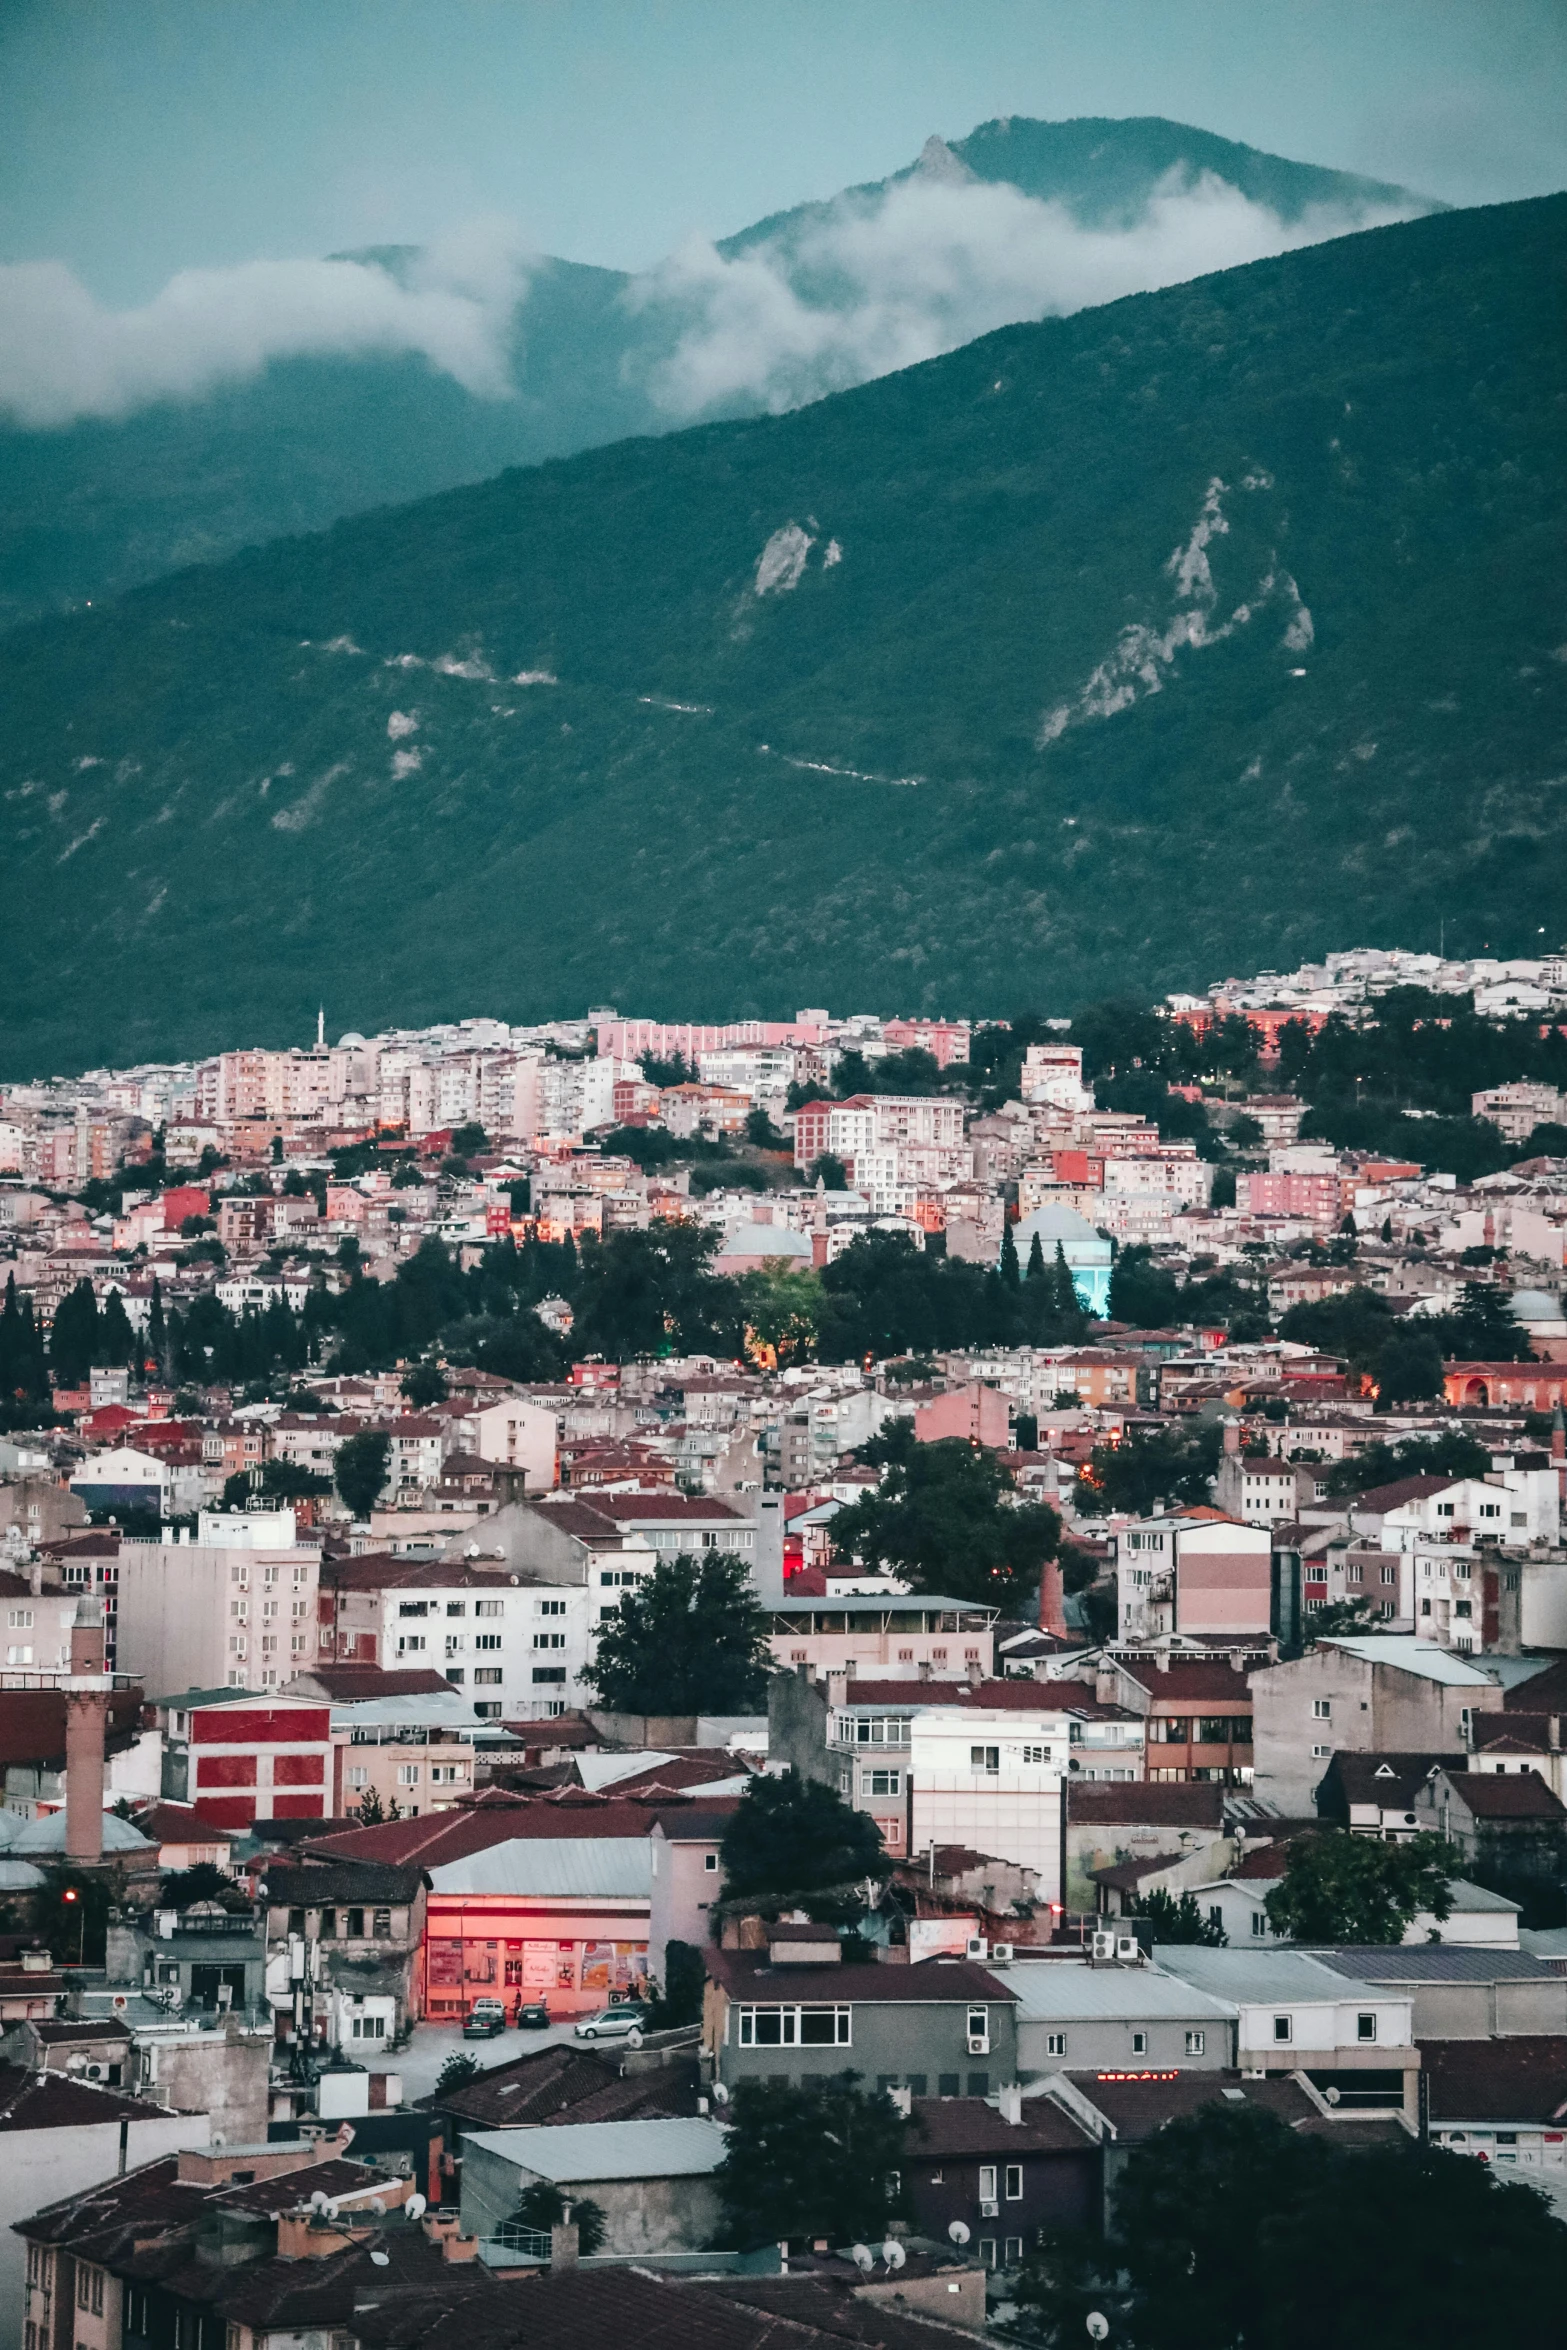 the view of a small town below the mountains